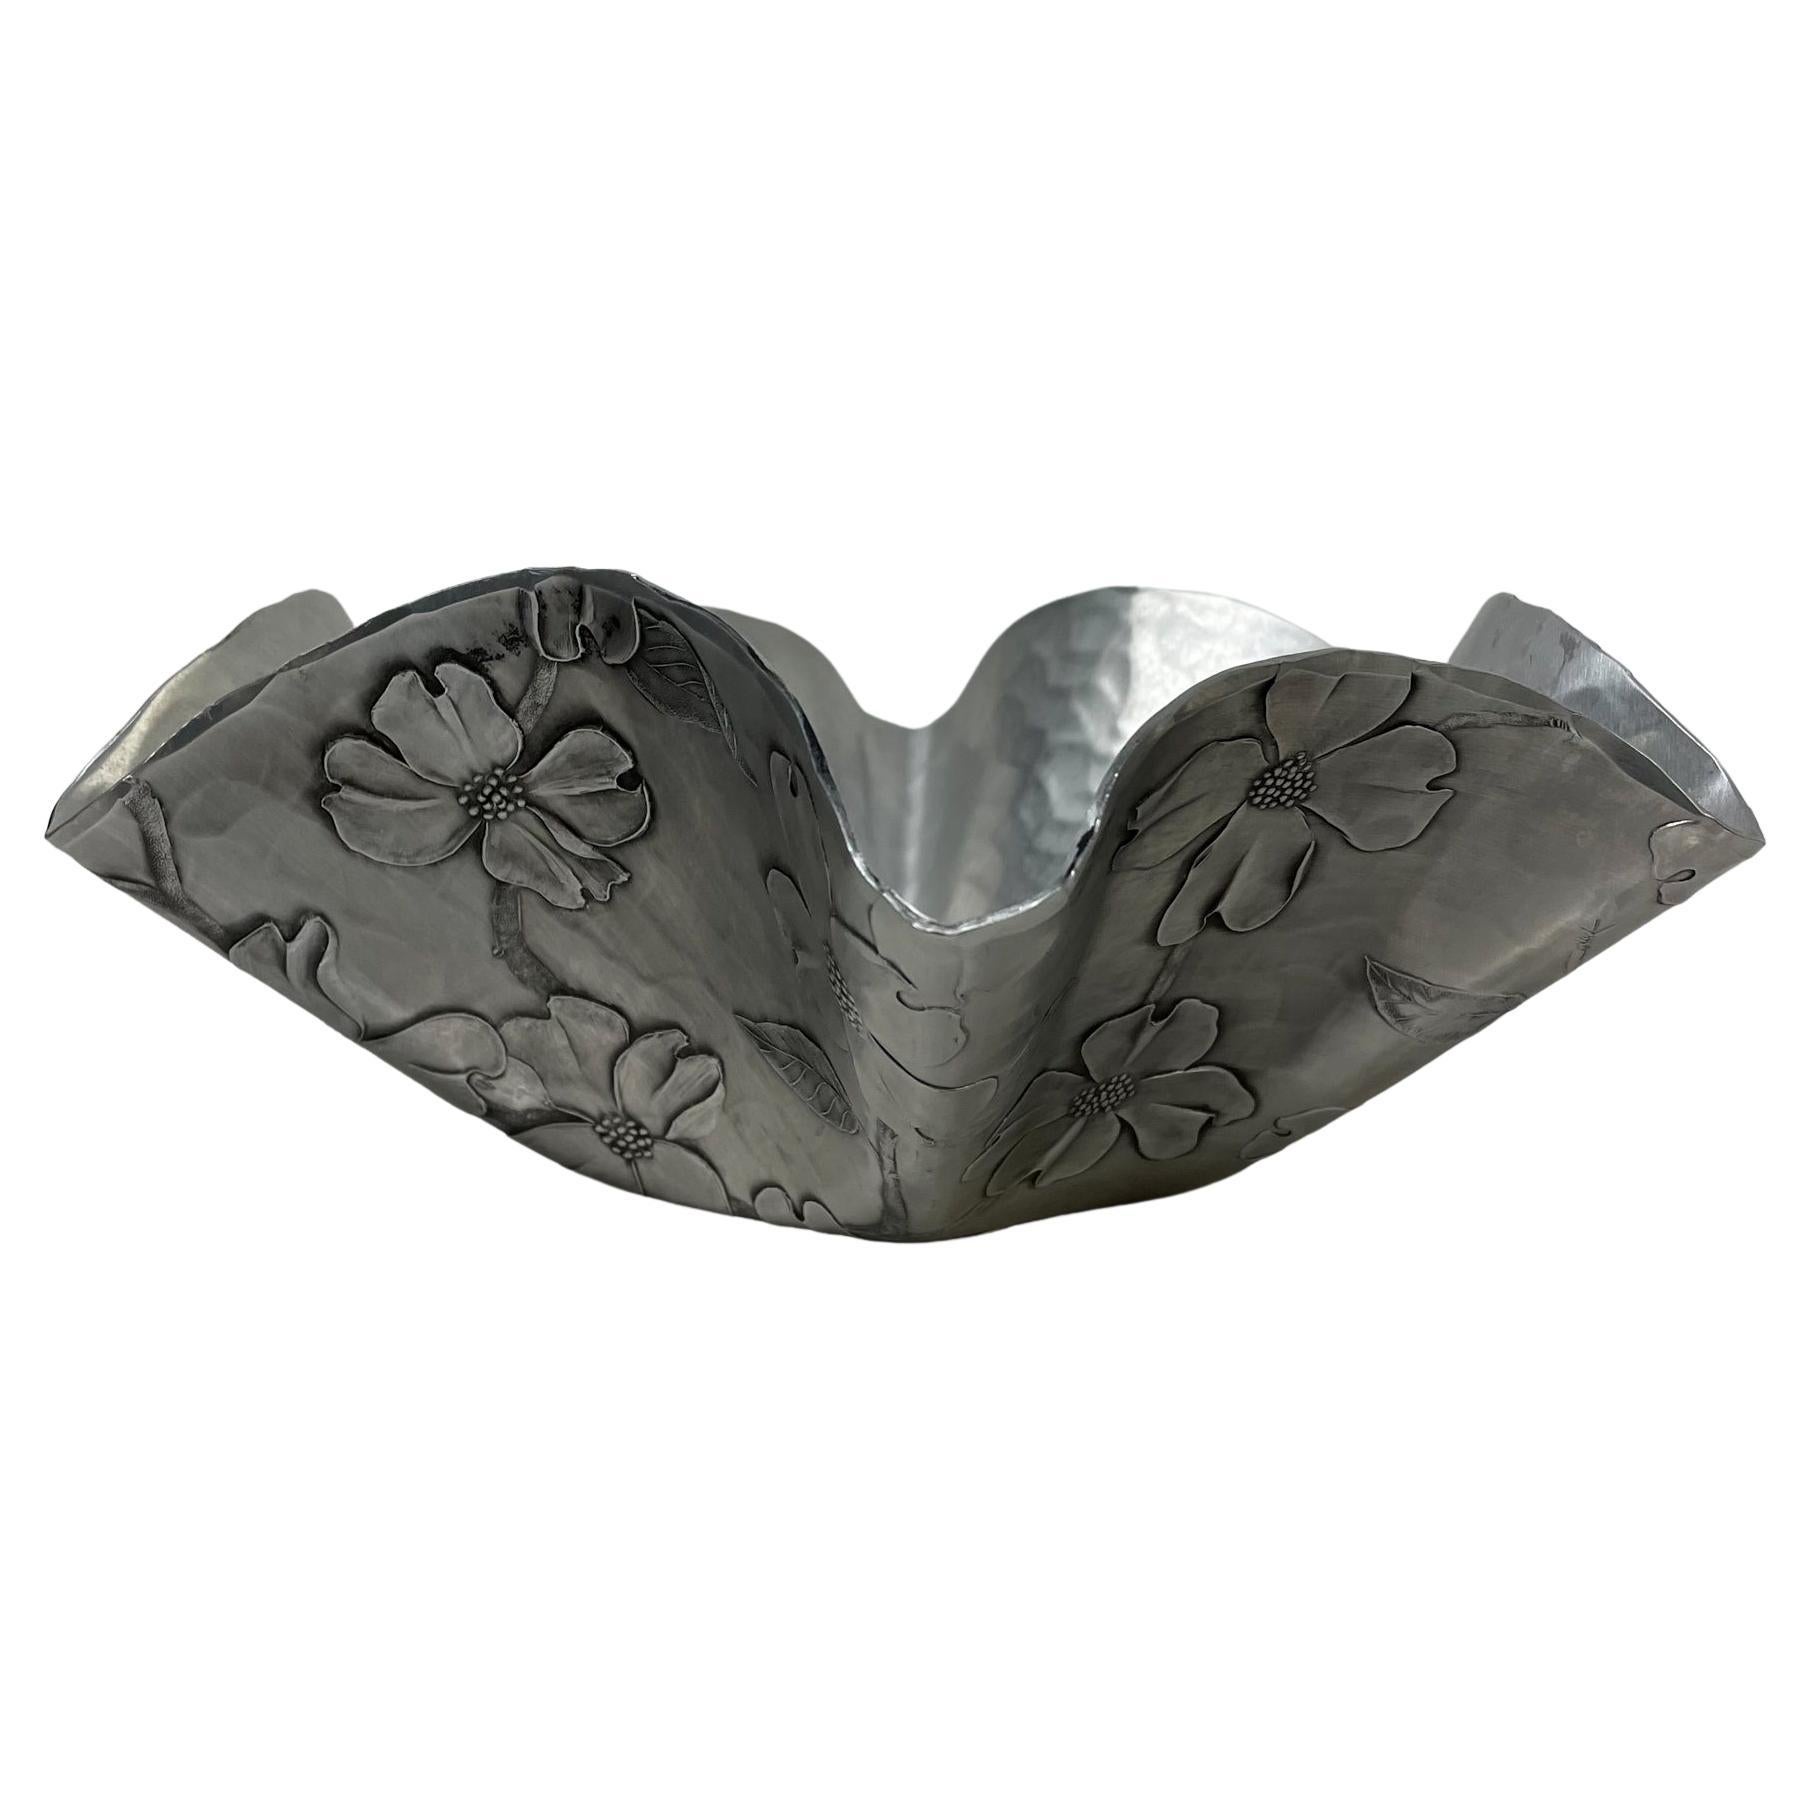 1960s Dogwood Ruffle Serving Bowl 
Handmade by Wendell August craftsmen in hammered aluminum collectible dish candy or catch it all.
from Grove City, Pennsylvania 
Wonderful flair with pretty dogwood floral motif.
Measures: 3.88 height x 10.5